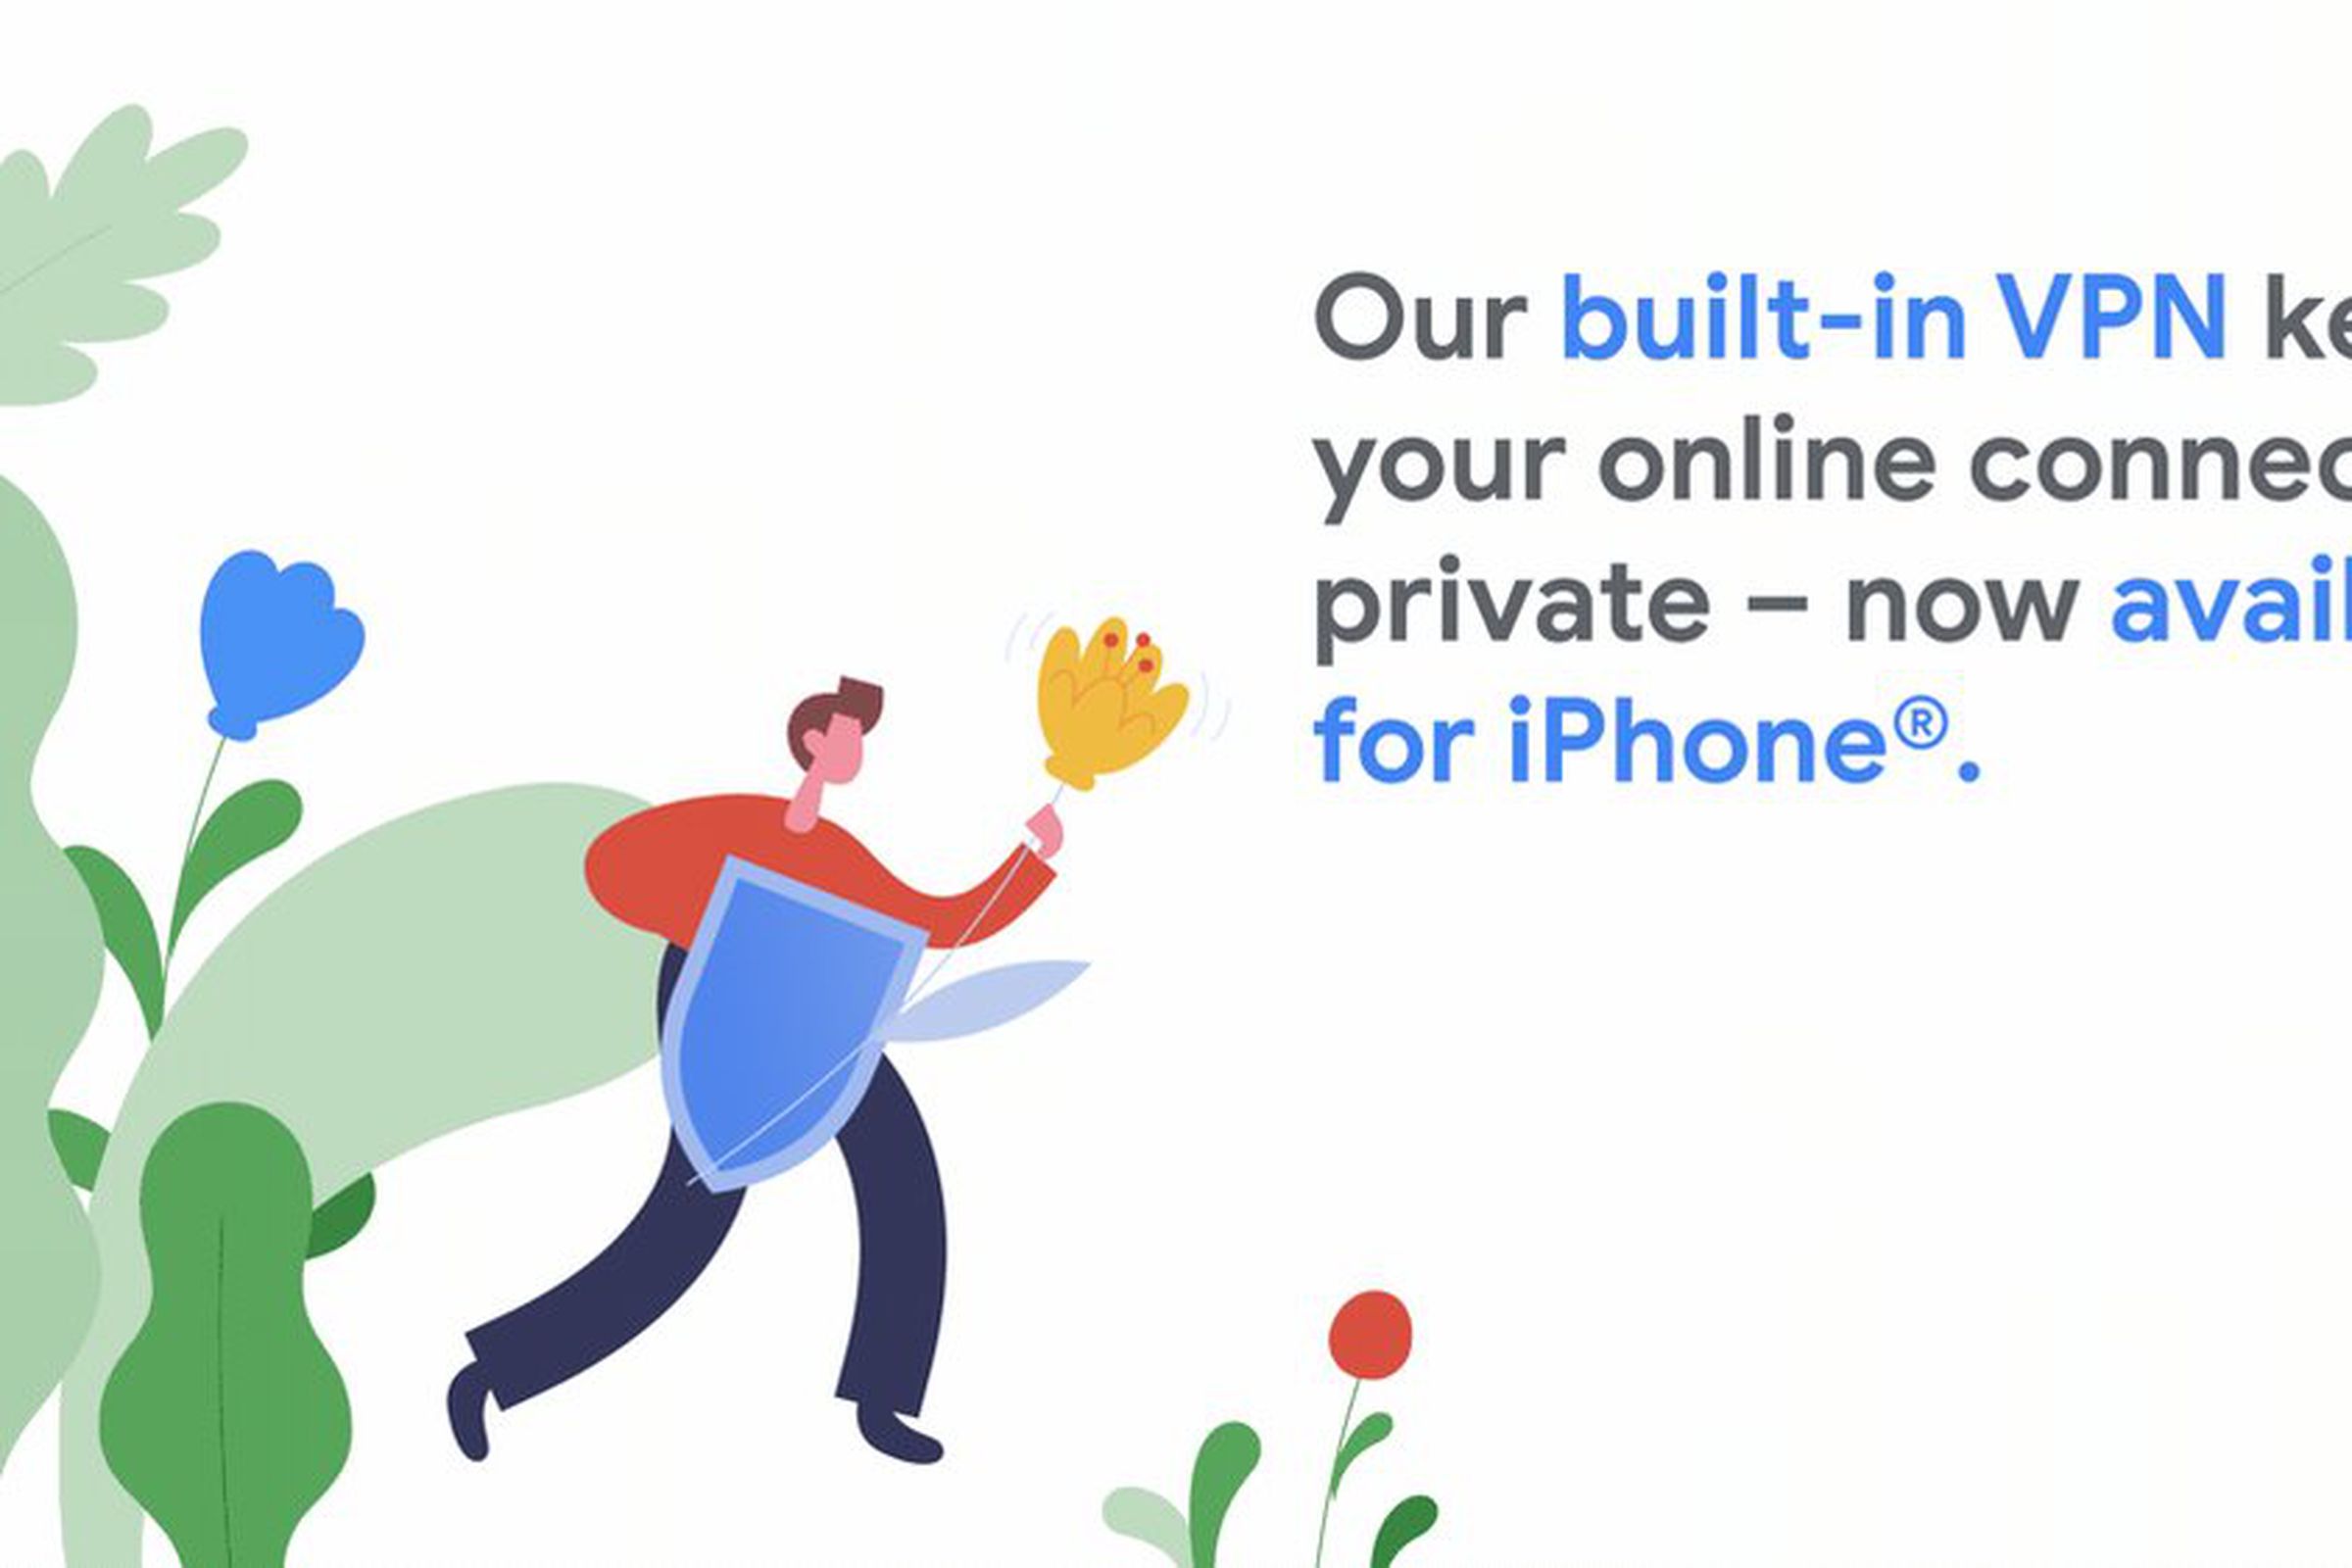 Google’s announcement about Fi’s VPN coming to iPhone.